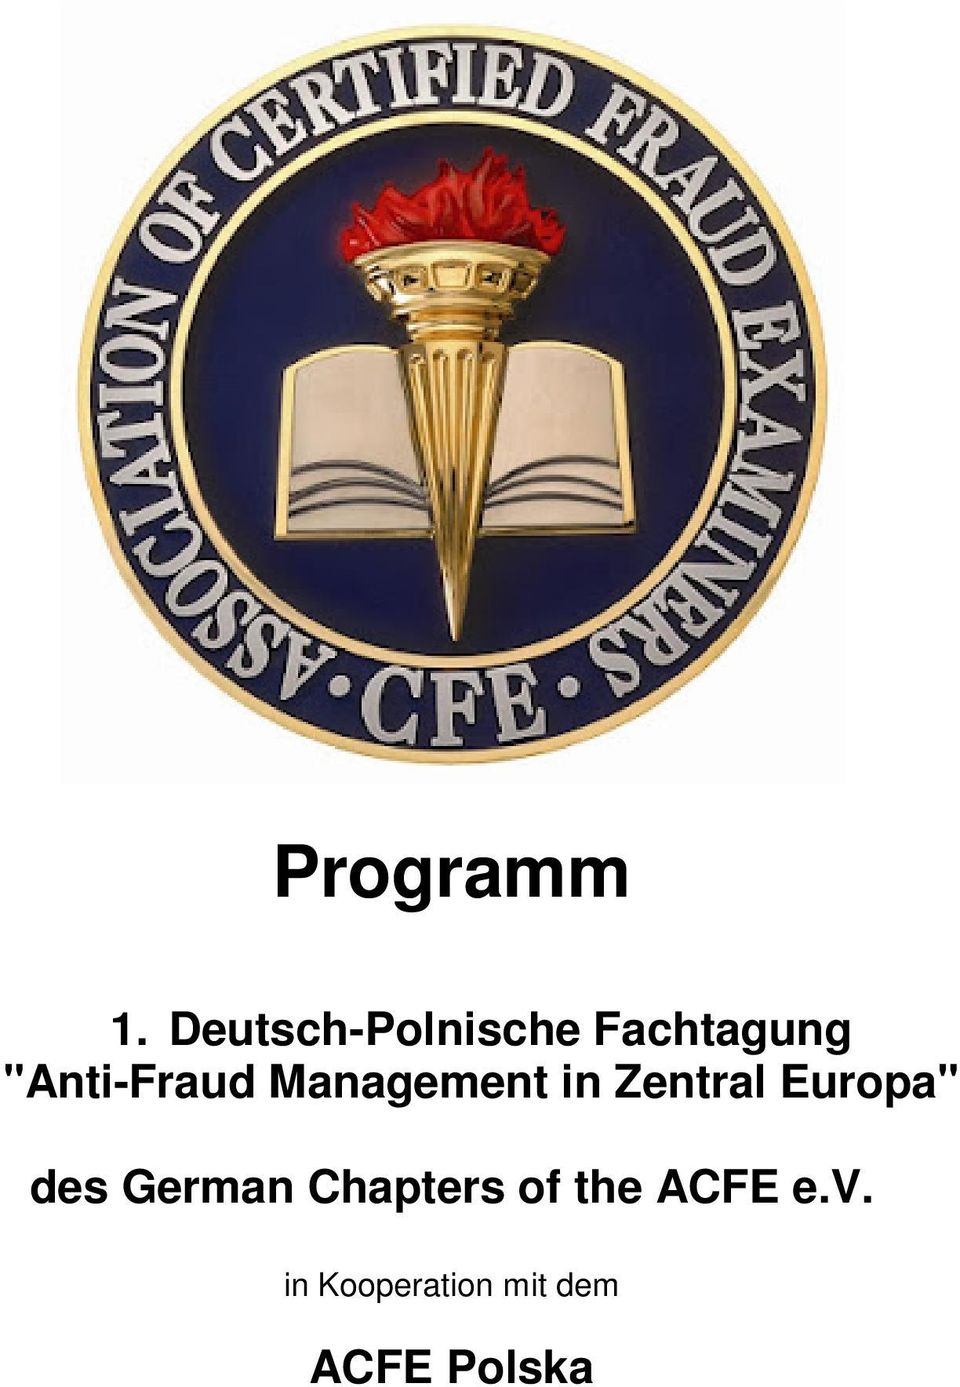 "Anti-Fraud Management in Zentral